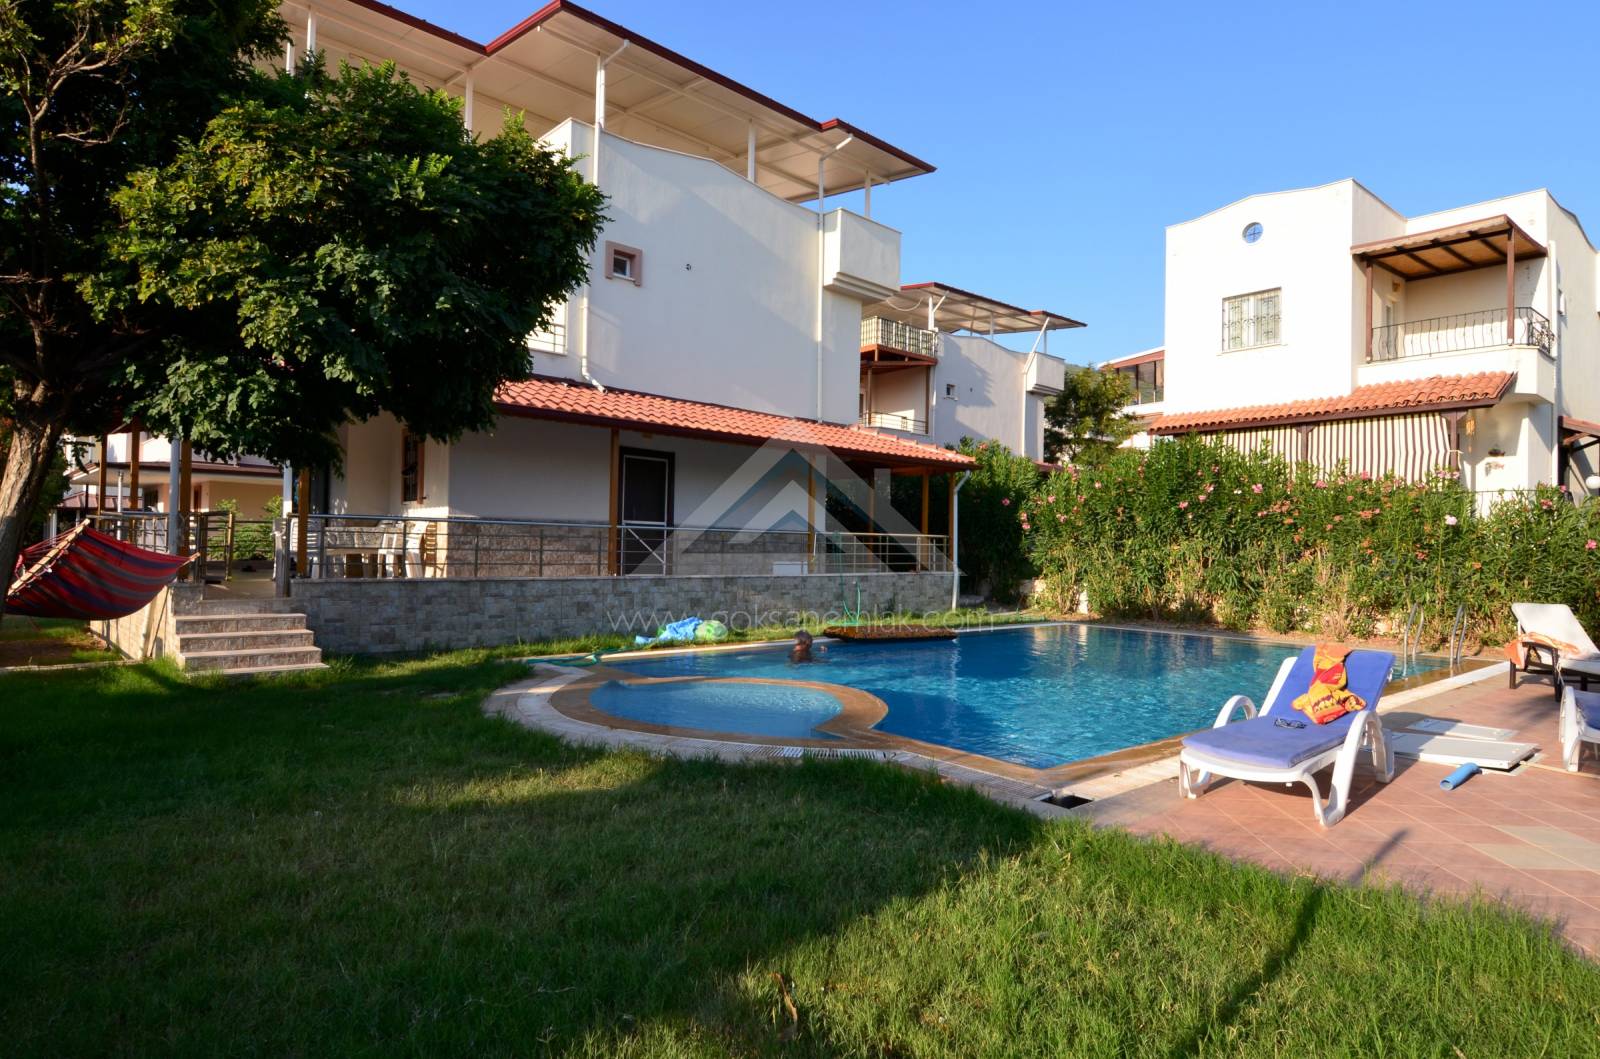 Detached Villa For Sale Center of Akbuk Two Shared Swimming Pool